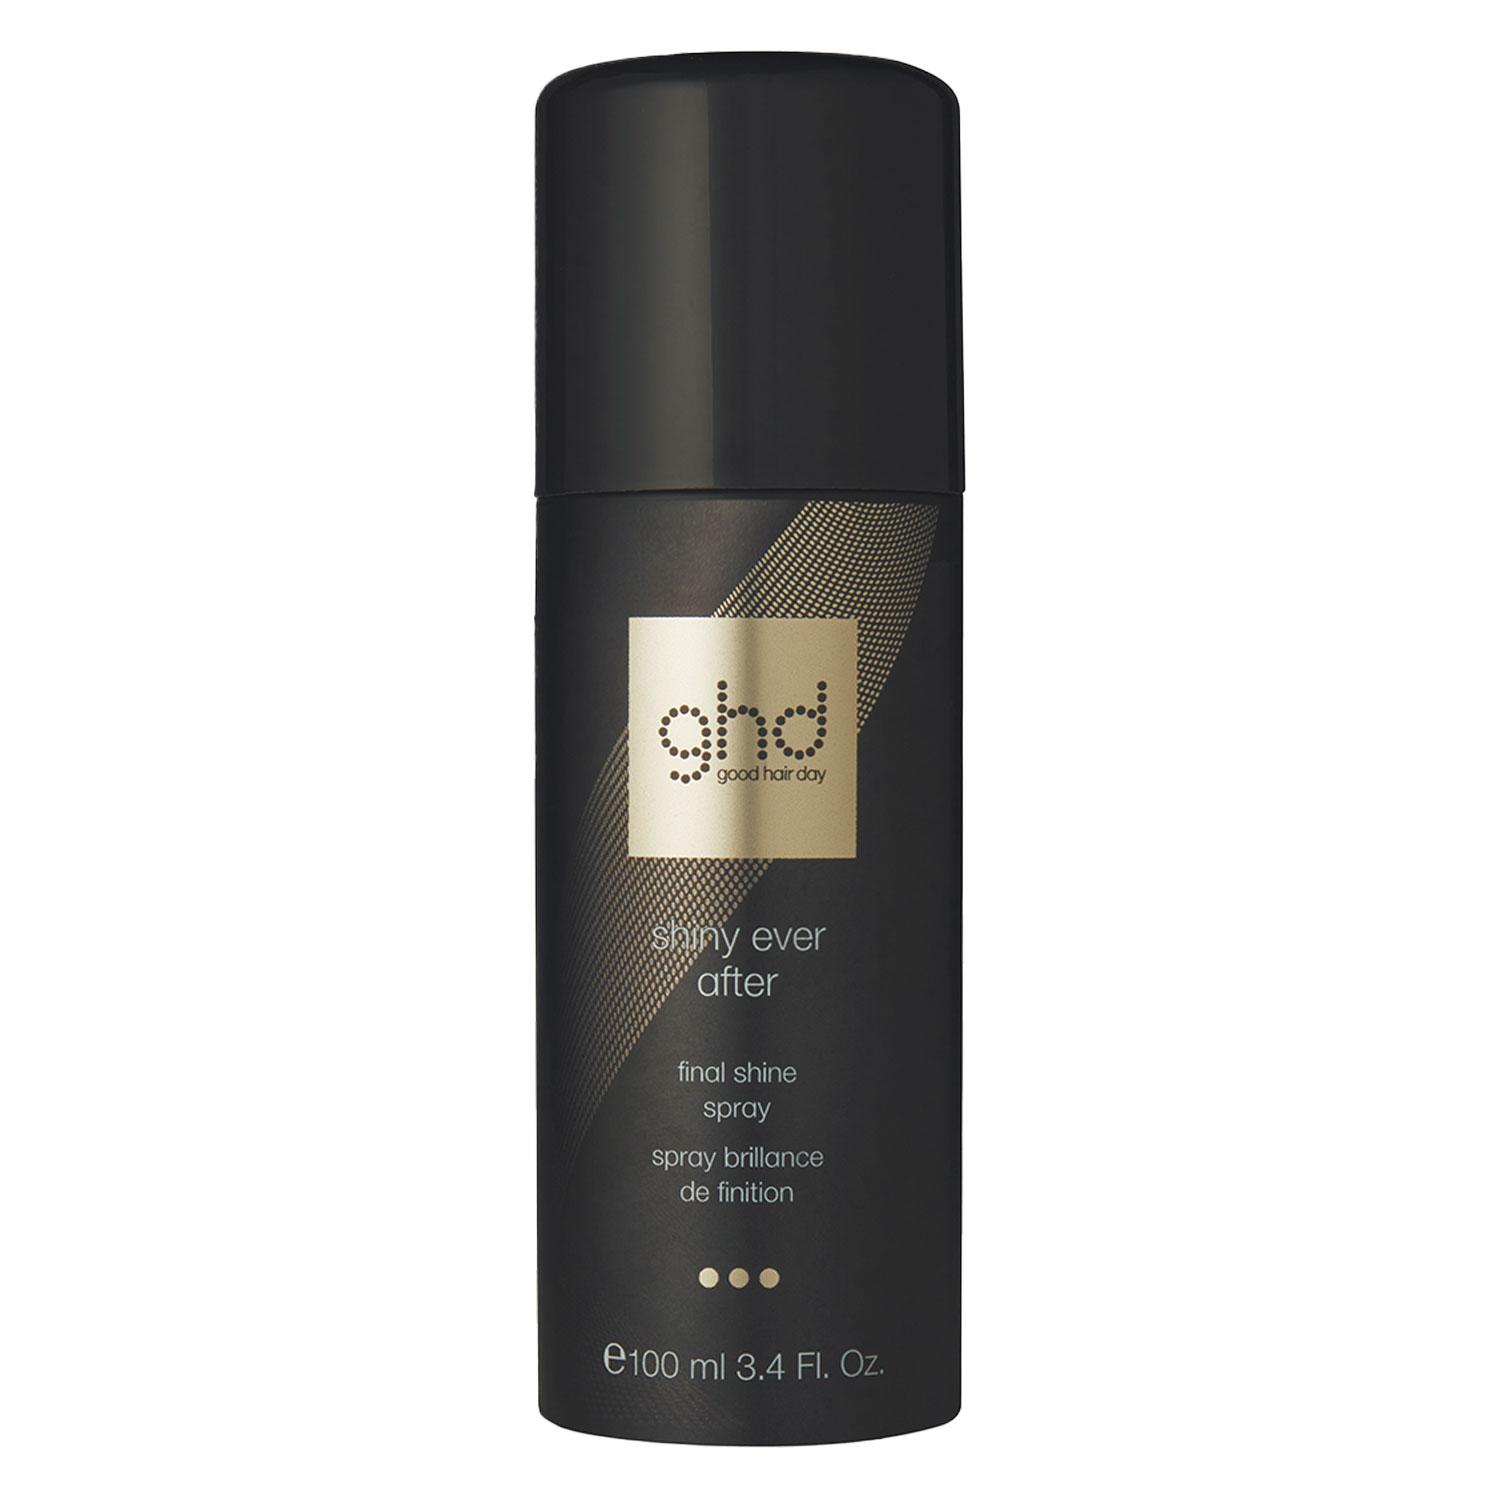 ghd Heat Protection Styling System - Shiny Ever After Final Shine Spray